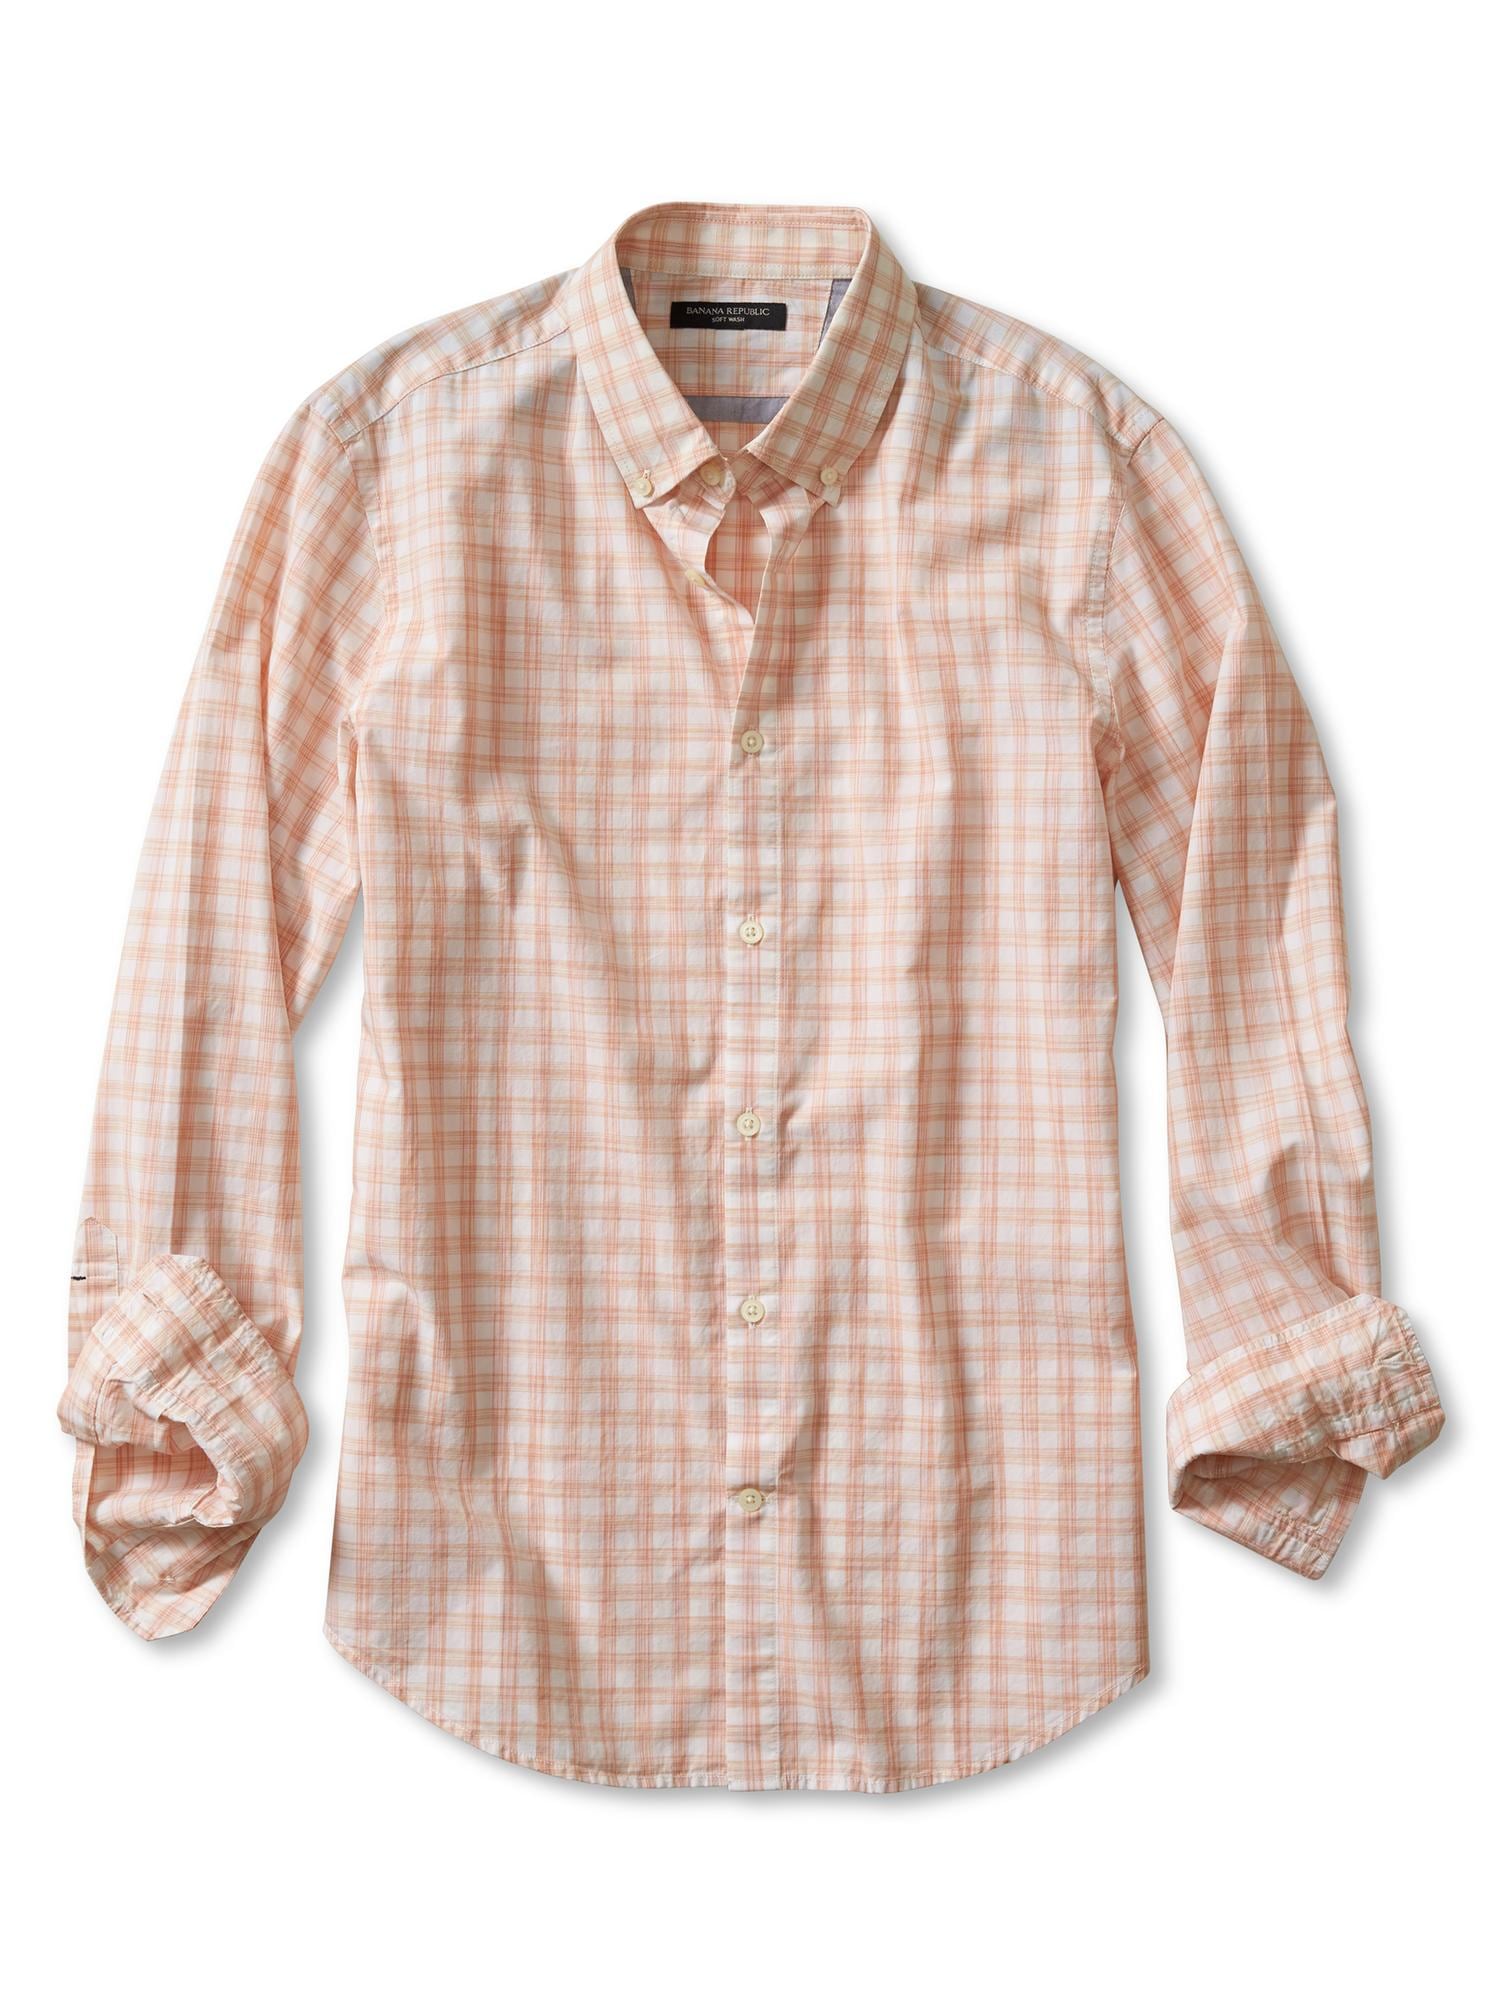 Tailored Slim-Fit Soft-Wash Bold Gingham Shirt